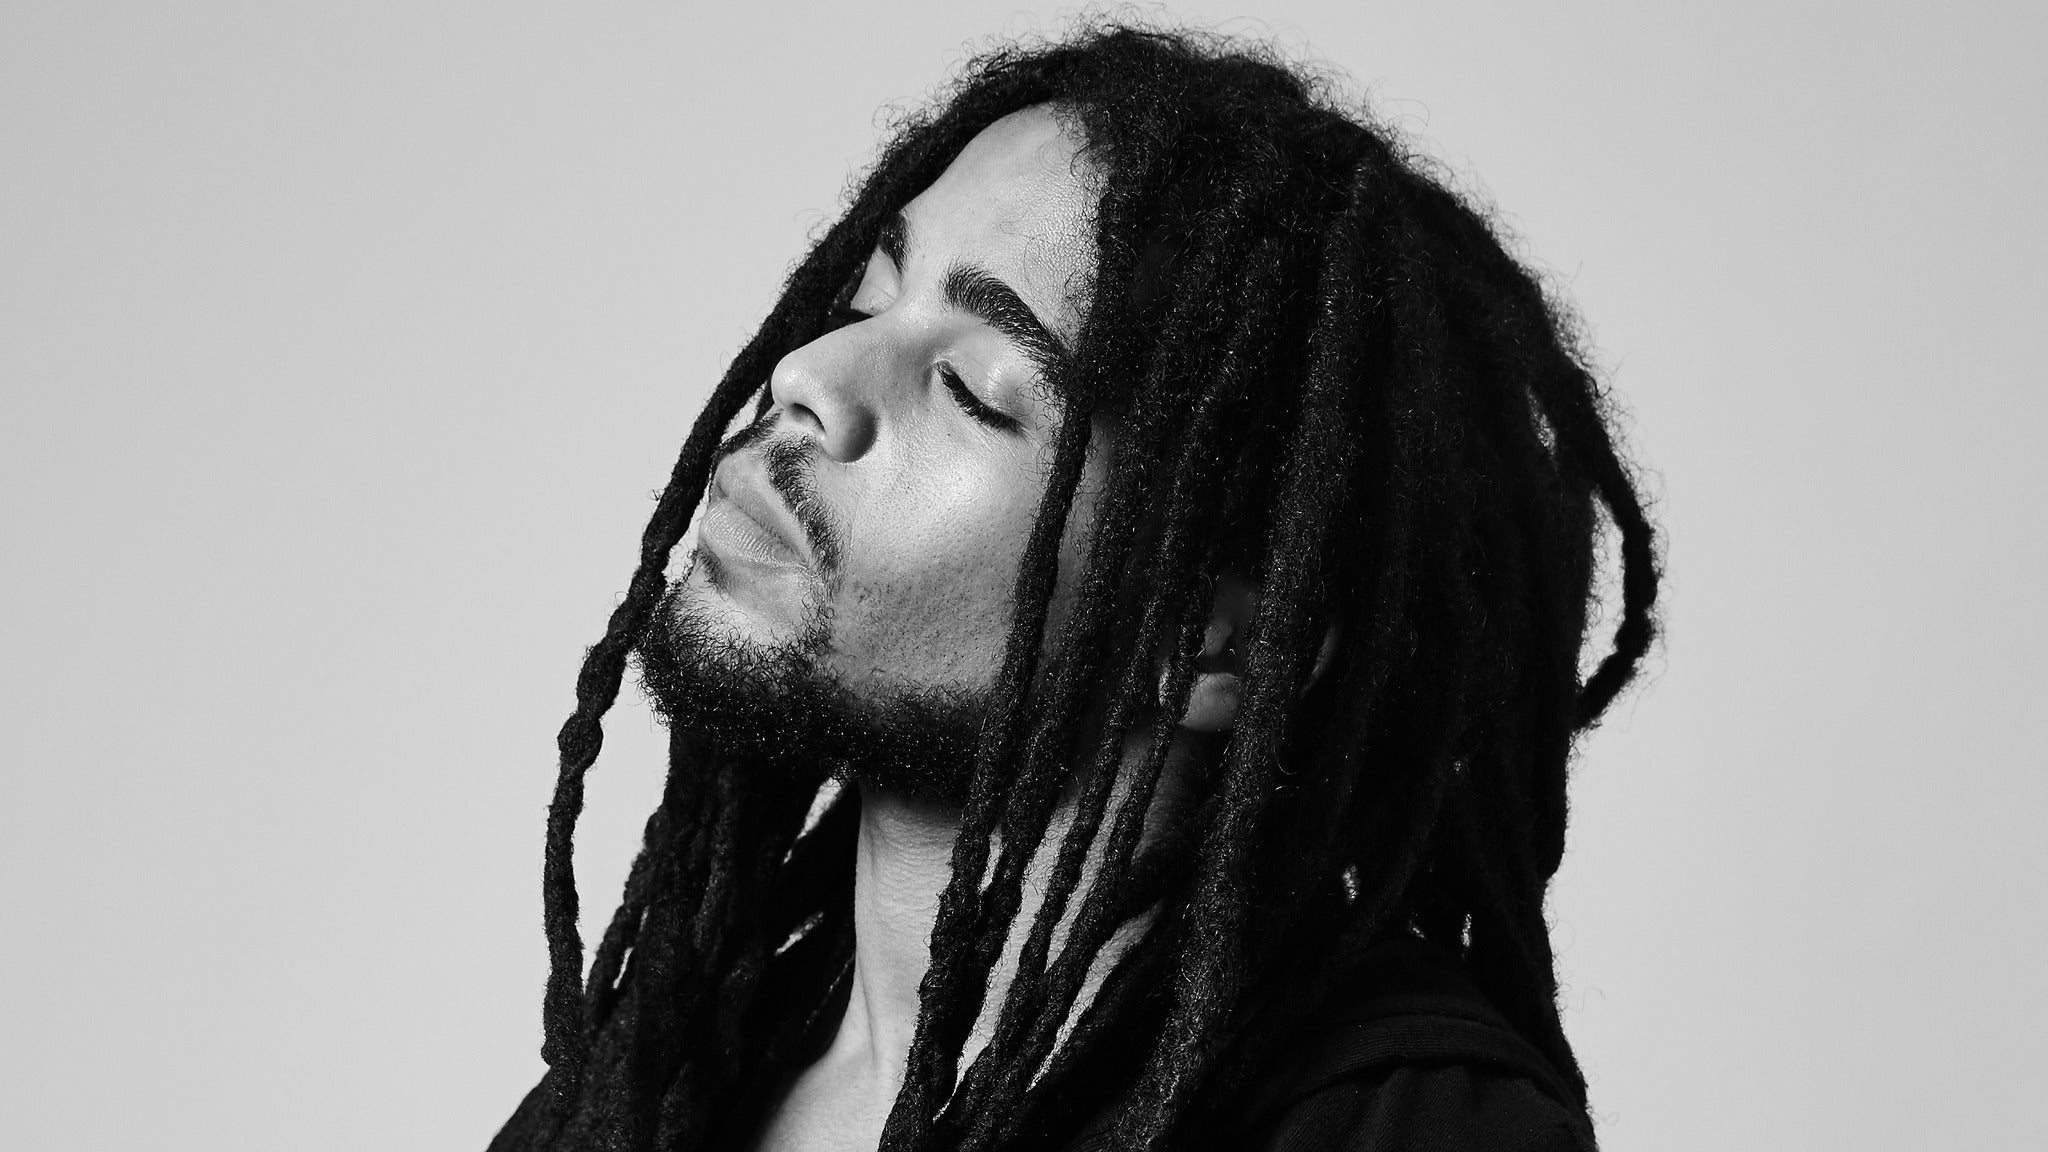 Skip Marley - The Change Tour in New York promo photo for Live Nation presale offer code